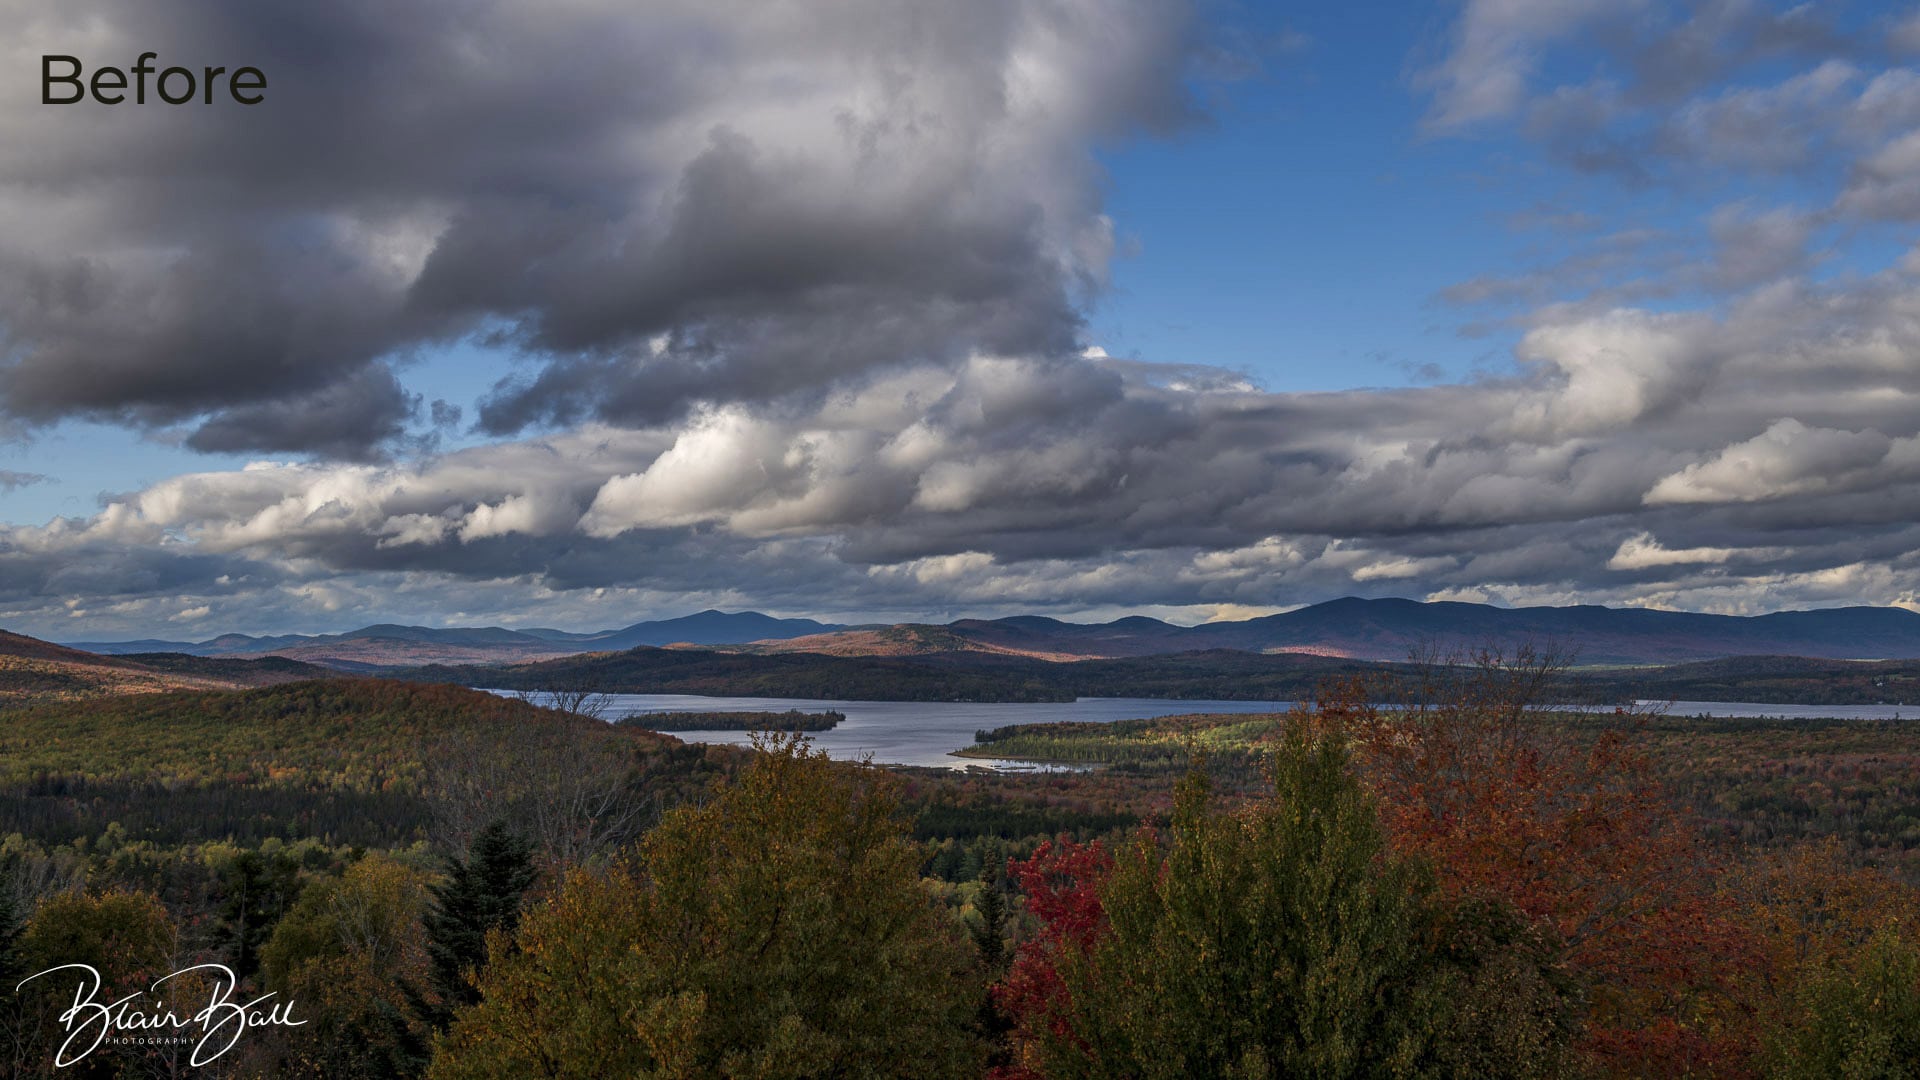 Rangeley Maine - Height of the Land - Before - ©Blair Ball Photography Image